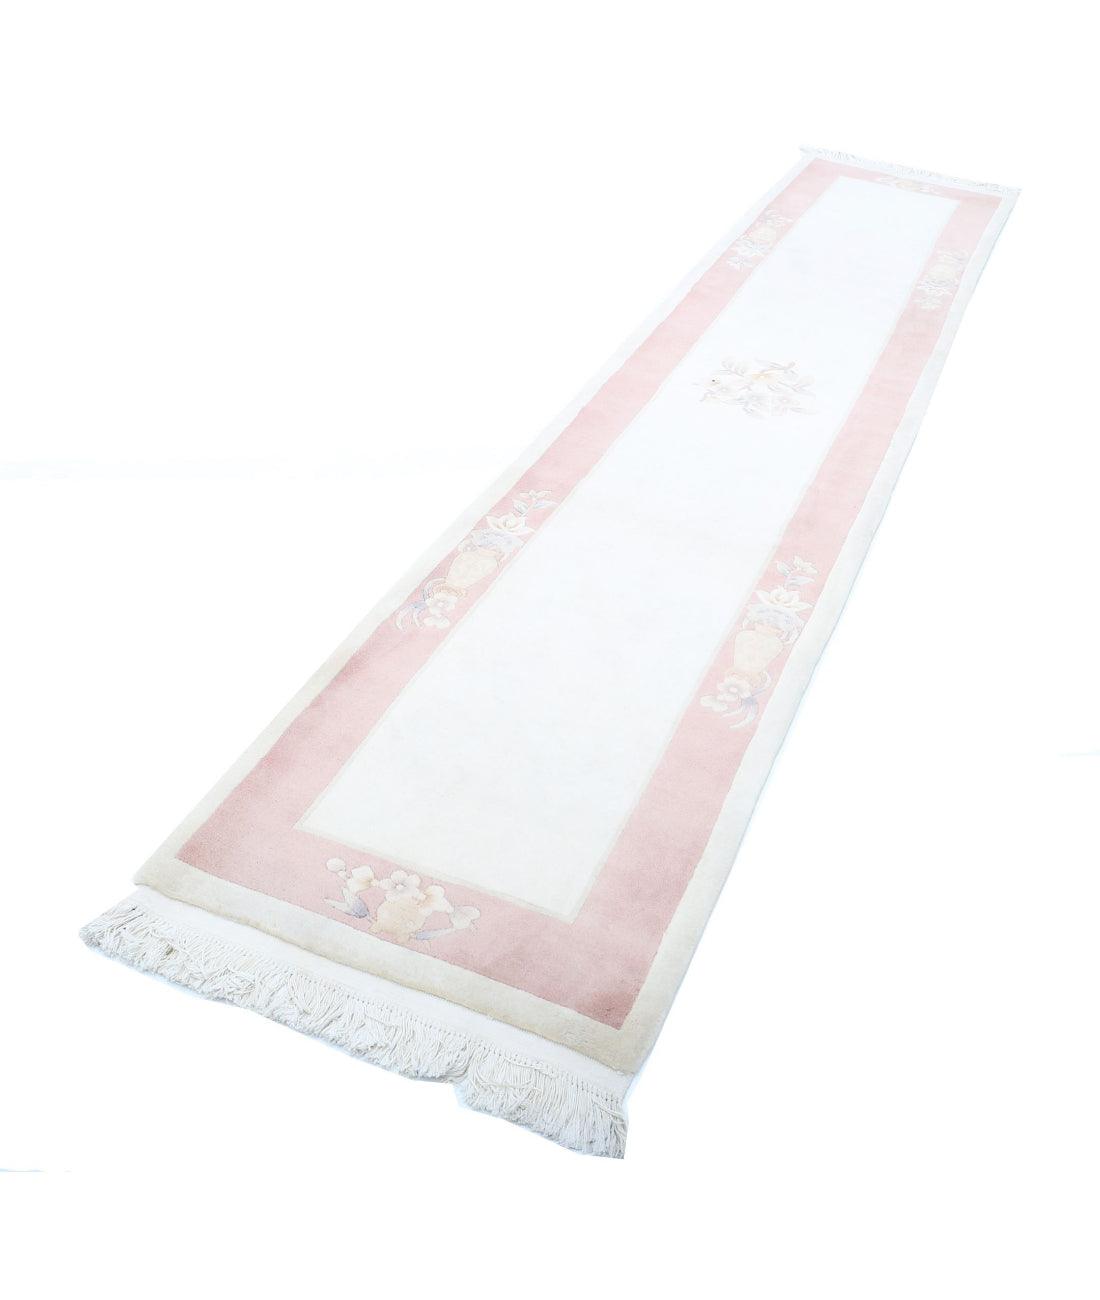 Chinese 2'6'' X 11'11'' Hand-Knotted Wool Rug 2'6'' x 11'11'' (75 X 358) / Ivory / Pink